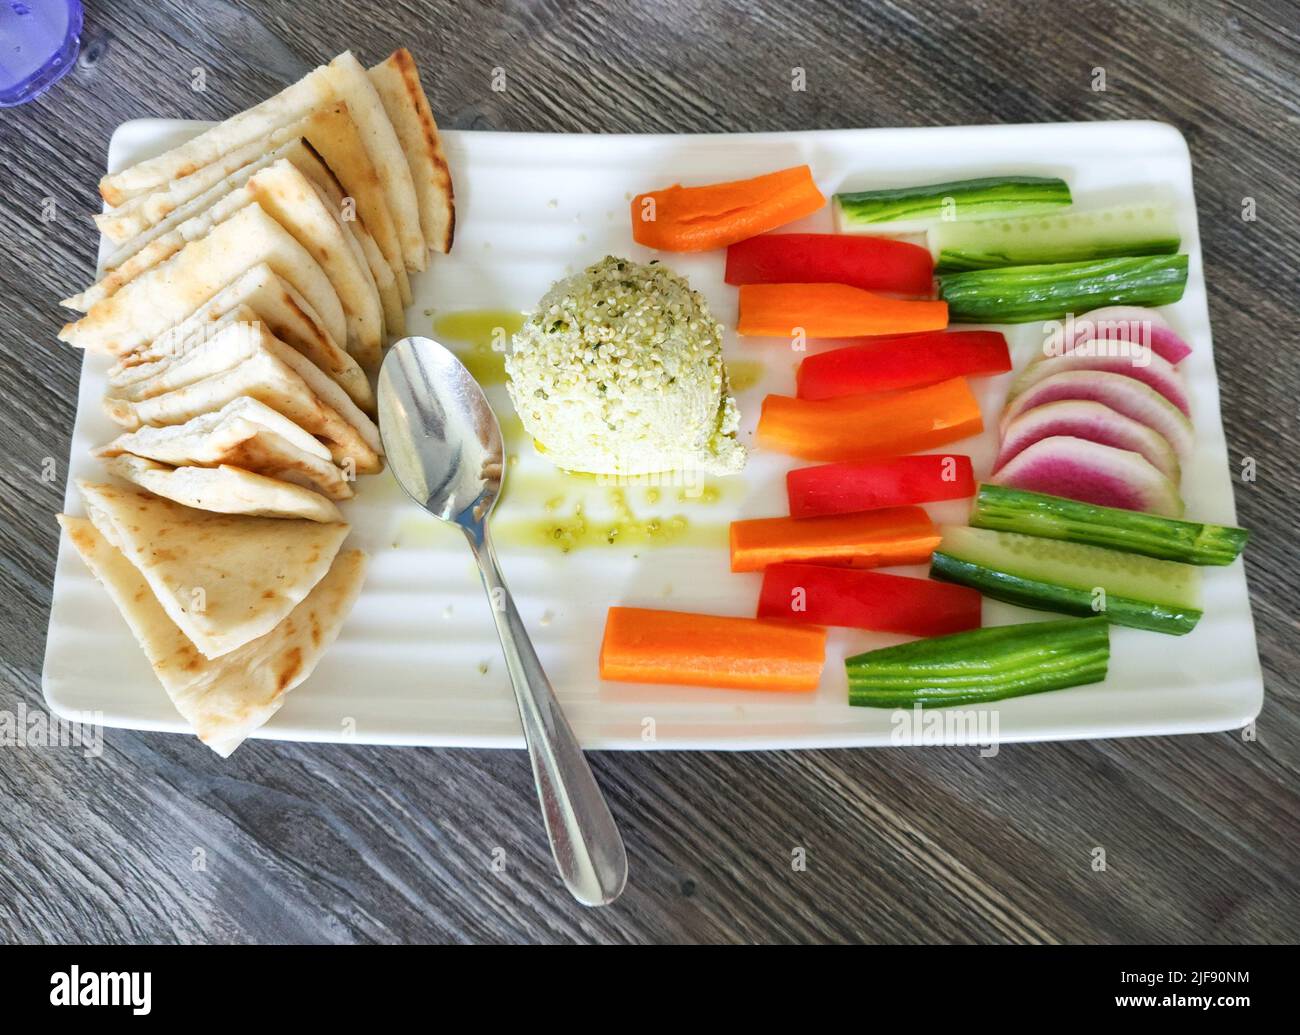 Edamame hummus with pita bread triangles, carrot sticks, cucumbers, and radishes on white serving platter. Stock Photo